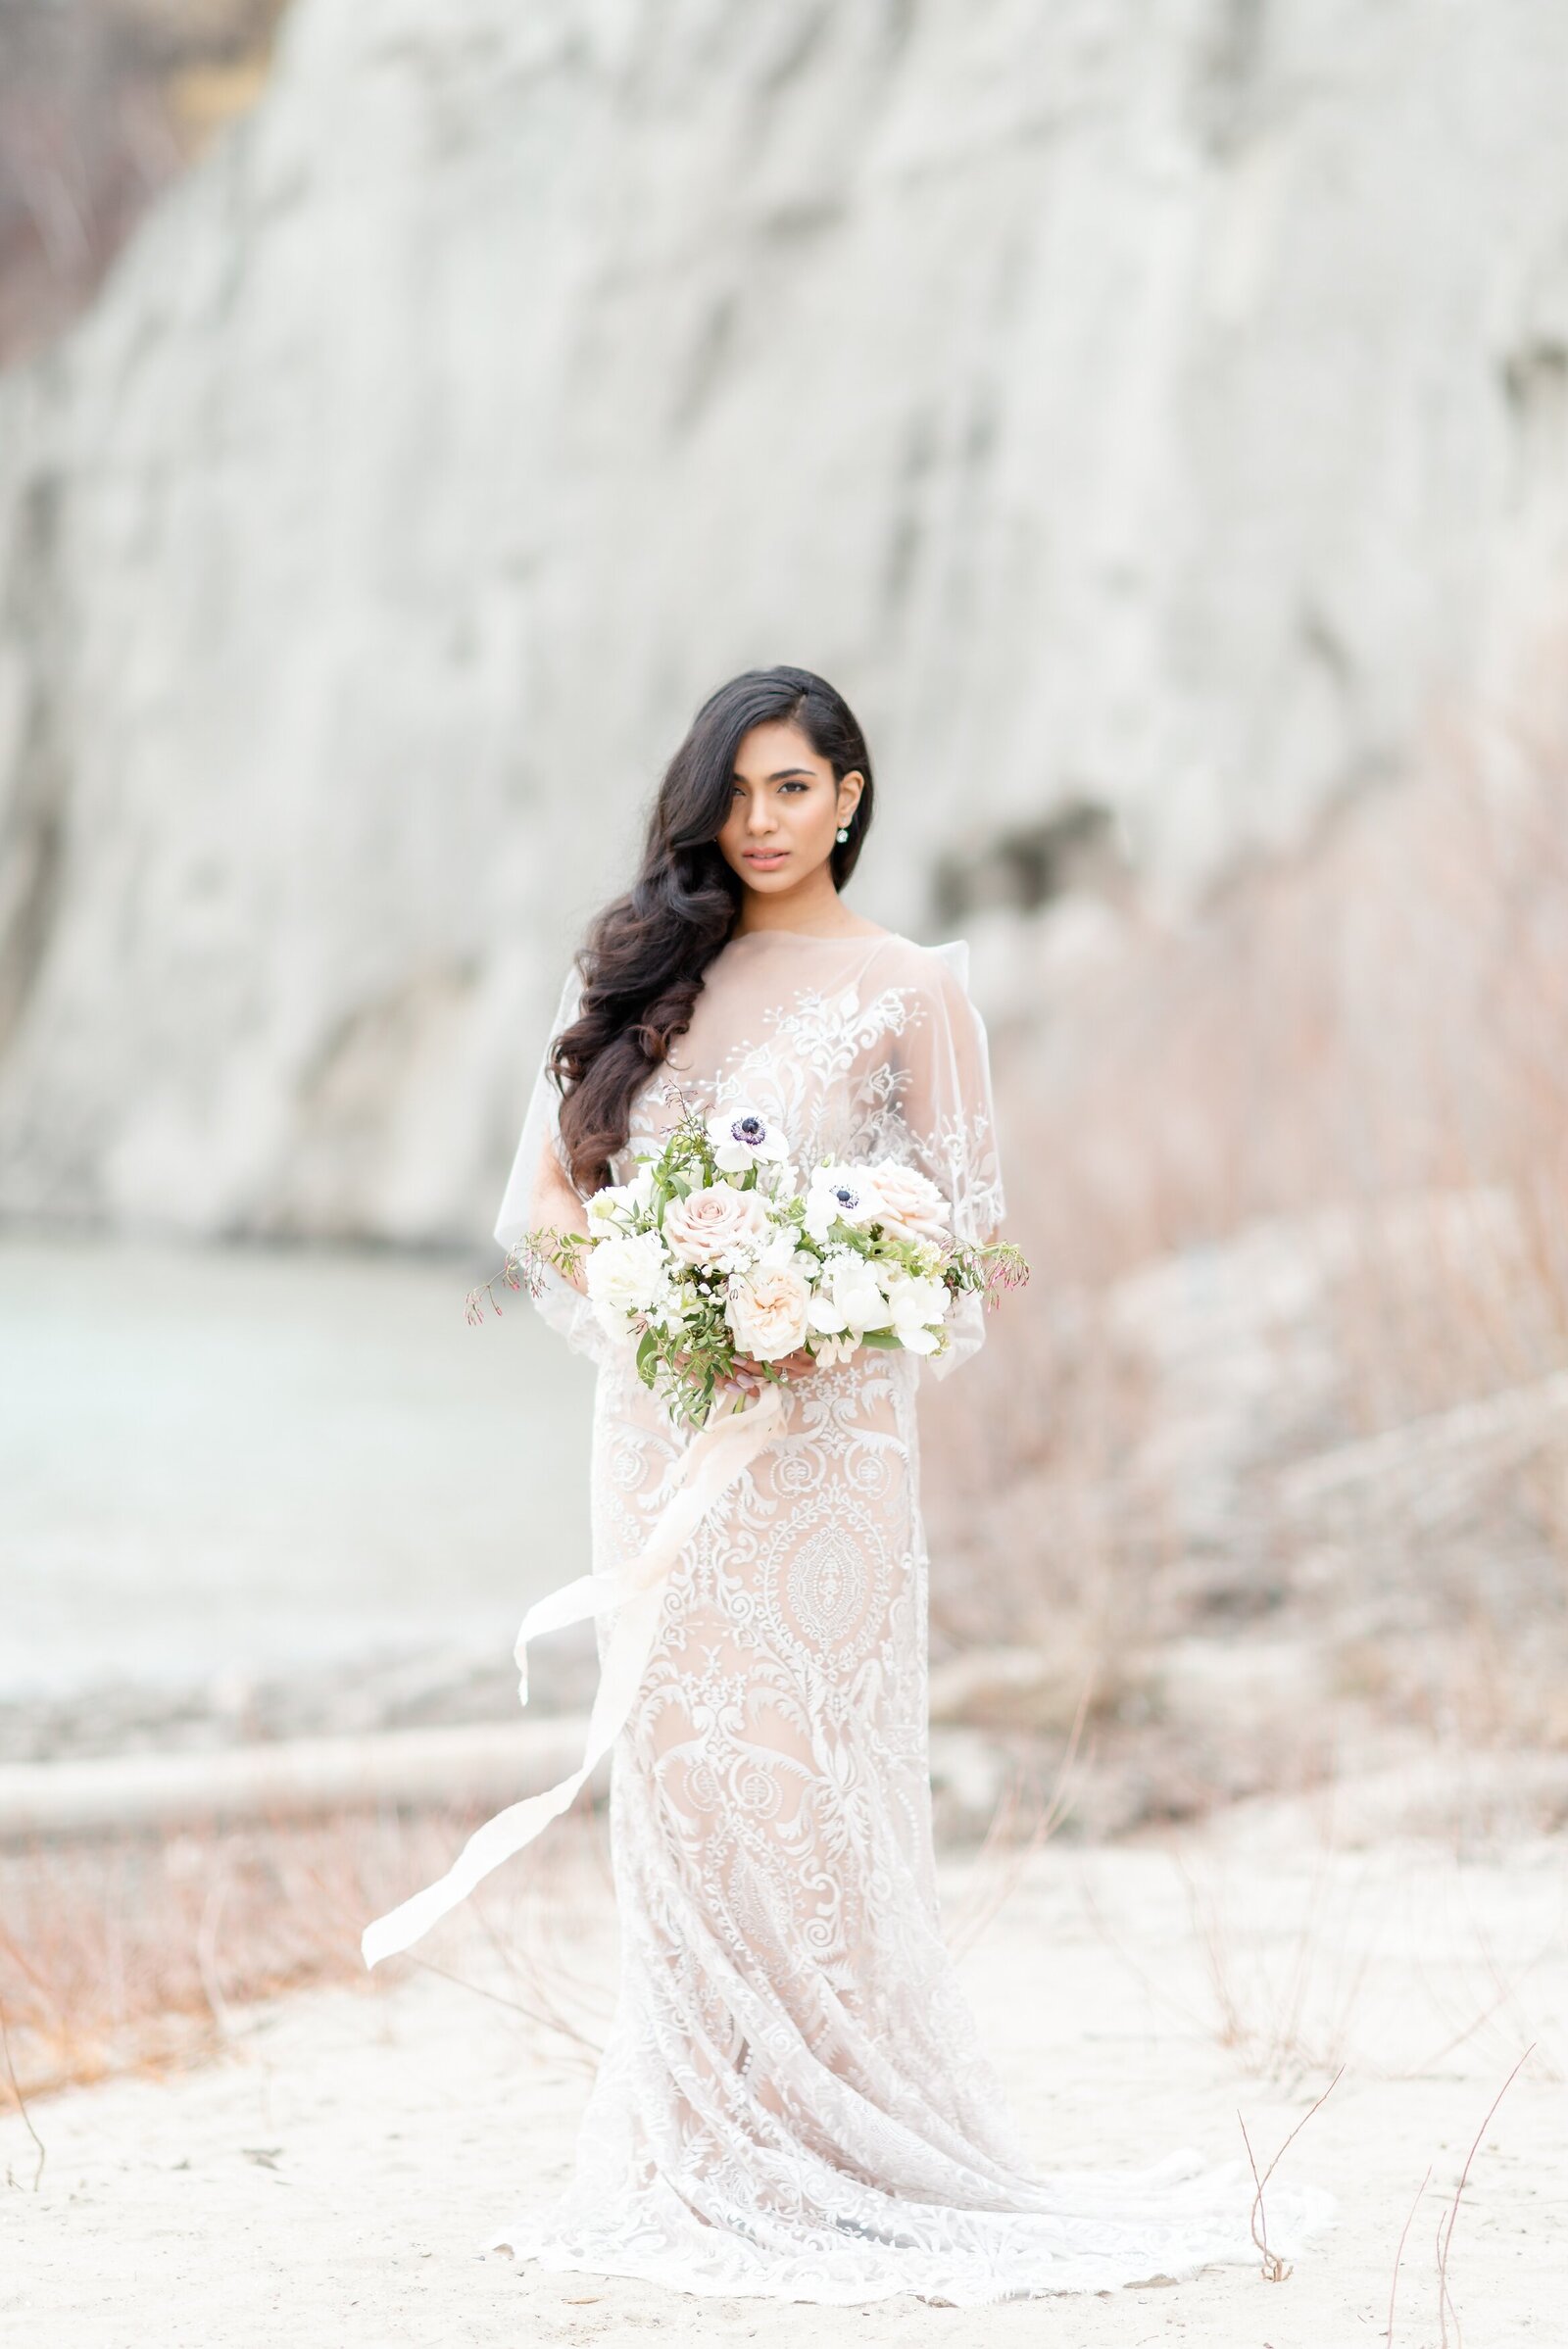 Bride-with-beautiful-long-hair-in-a-lace-wedding-dress-on-the-beach-in-southwestern-ontario